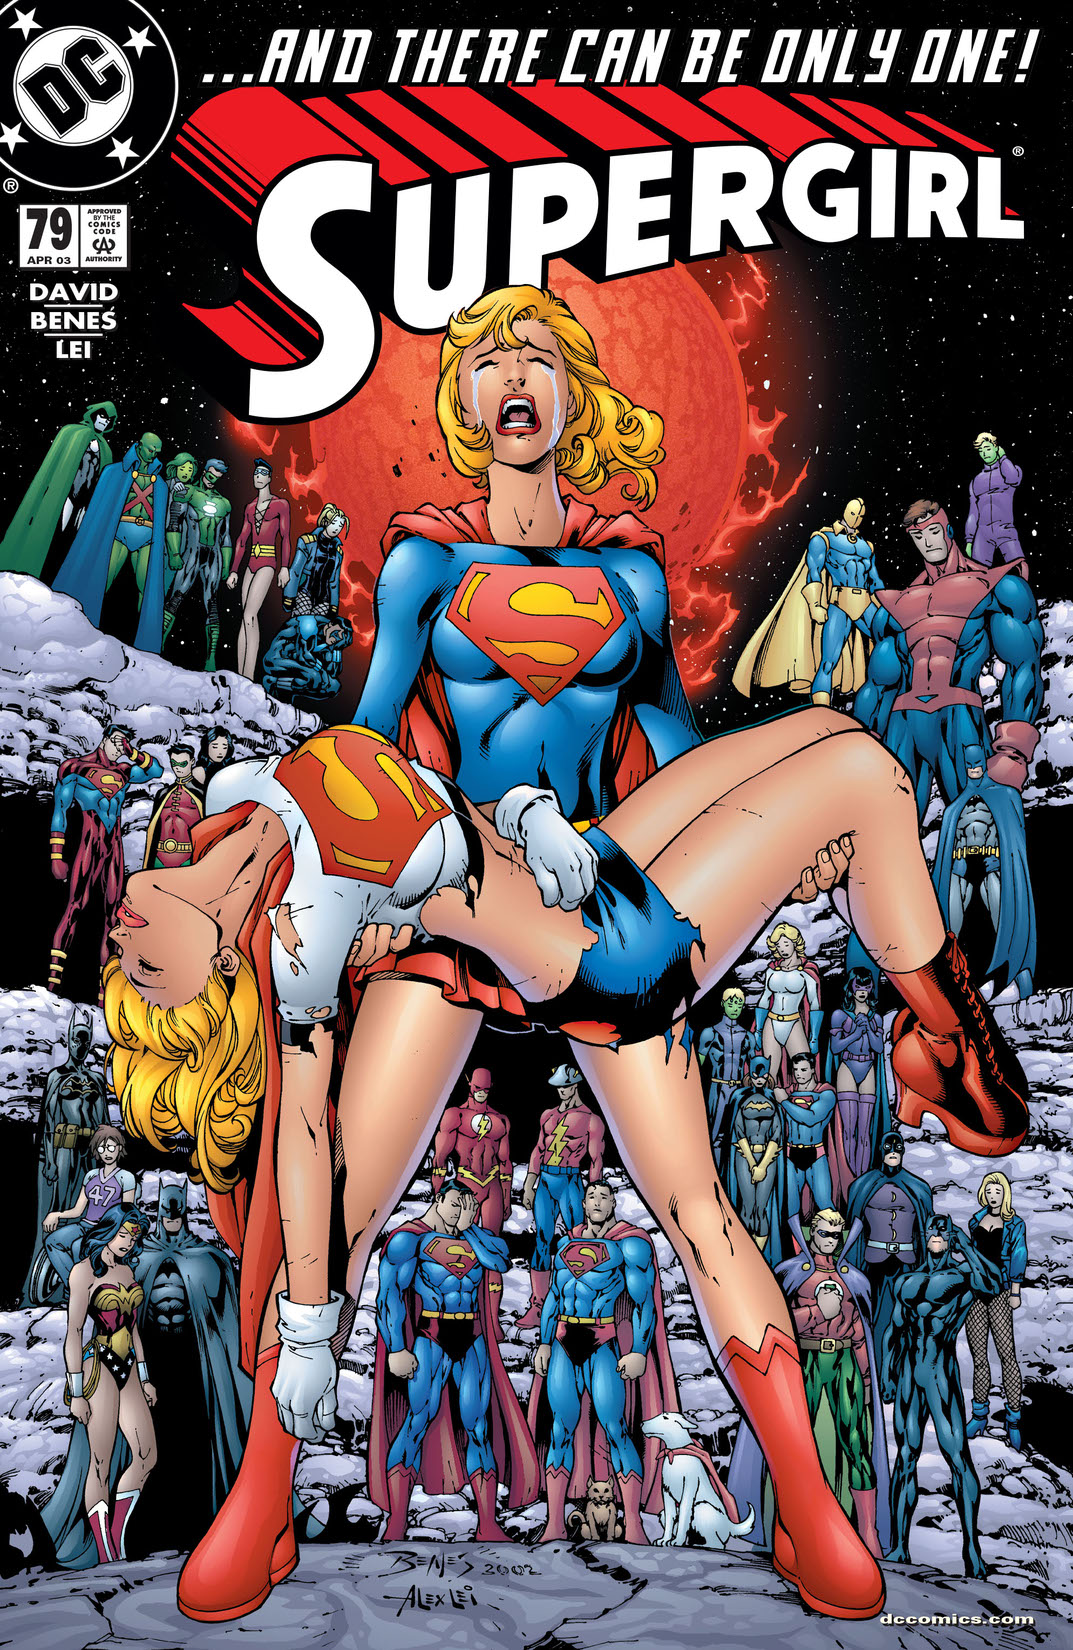 Supergirl (1996-) #79 preview images